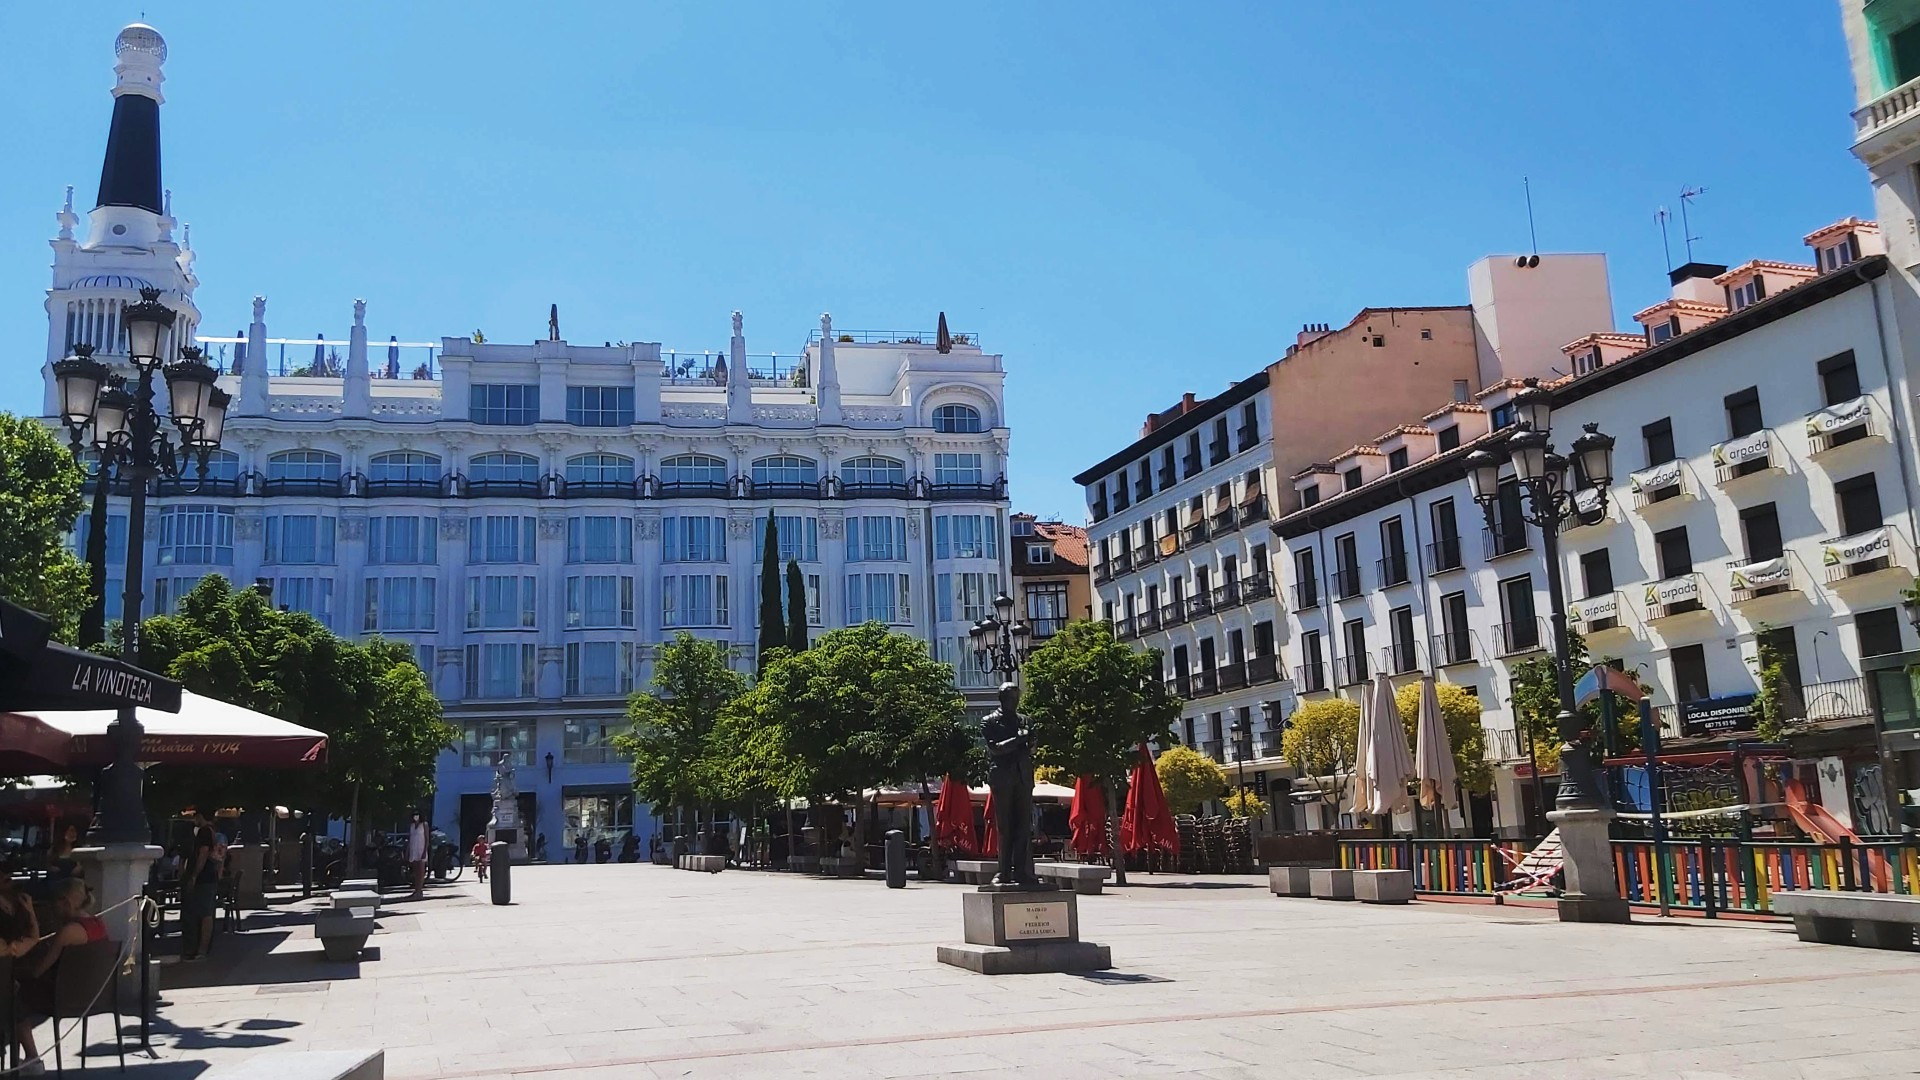 Packed with tapas bars and terraces, Barrio de Las Letras, Madrid literary quarter is also the closest area to Madrid's Golden Triangle of Art and El Prado Museum